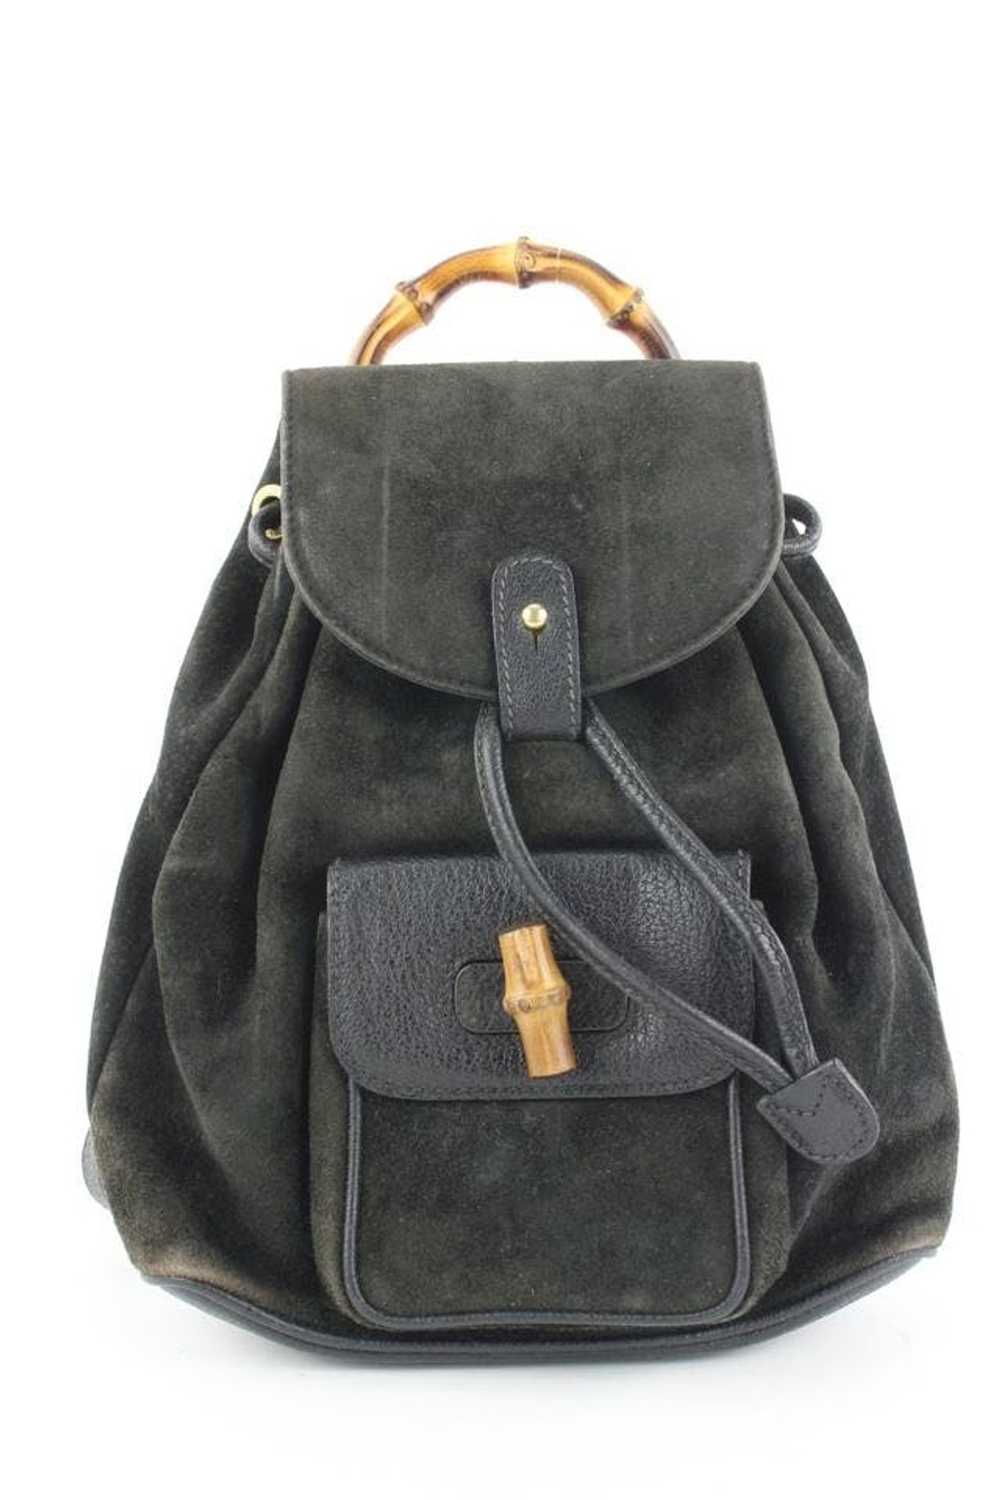 Gucci Gucci Black Suede Bamboo Mini Backpack 690g… - image 1